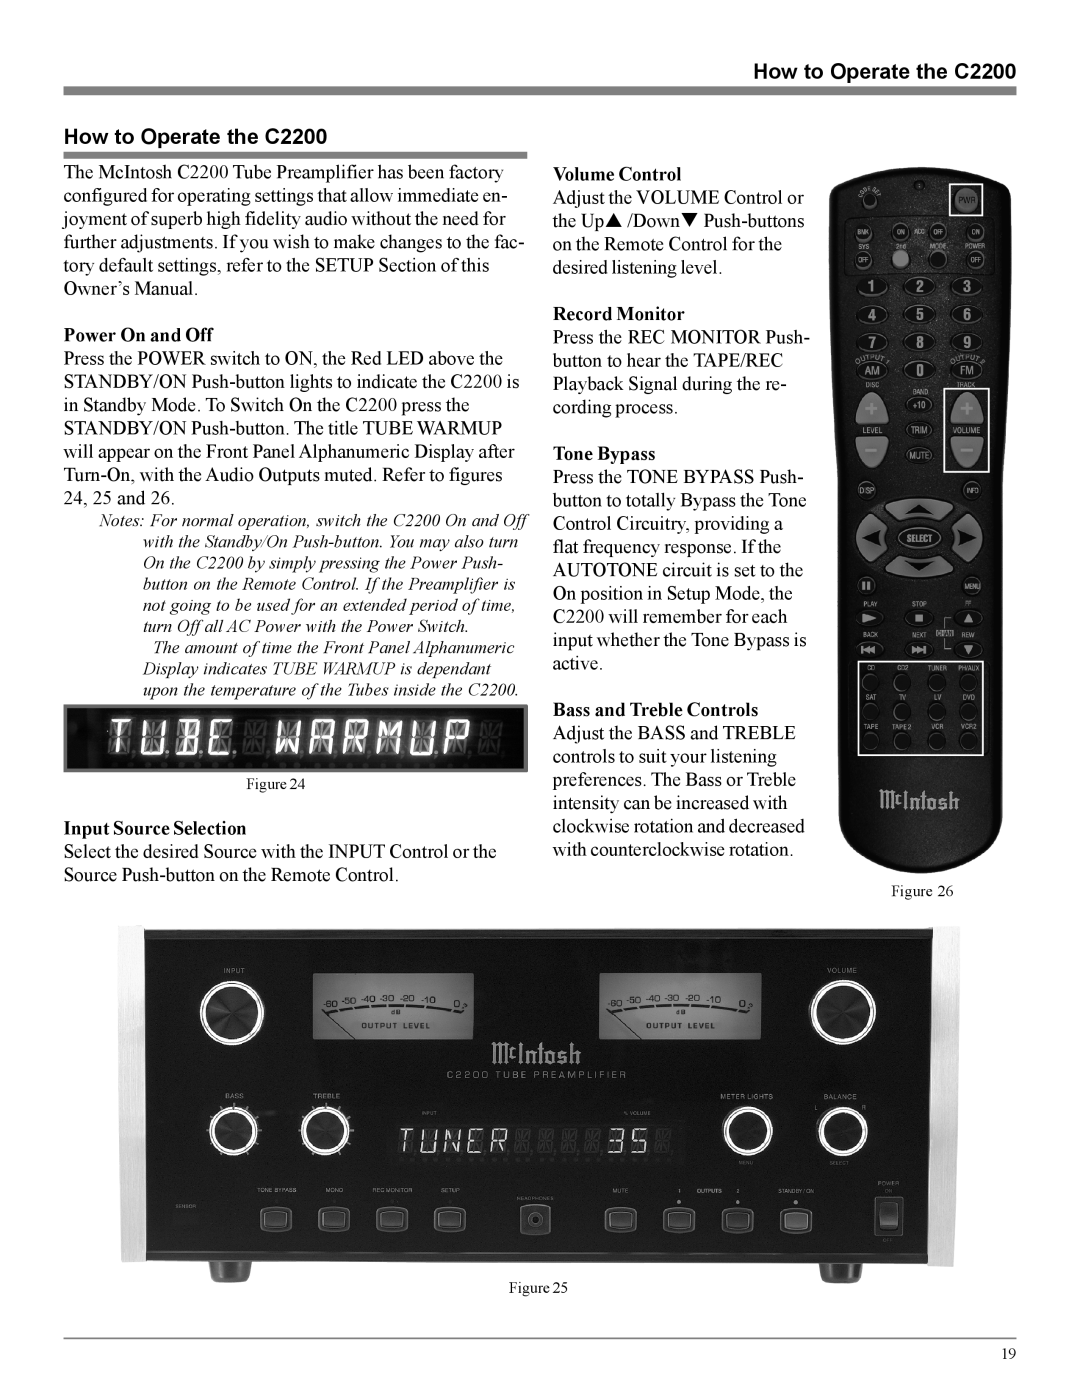 McIntosh owner manual How to Operate the C2200, Power On and Off, Input Source Selection, Volume Control, Record Monitor 